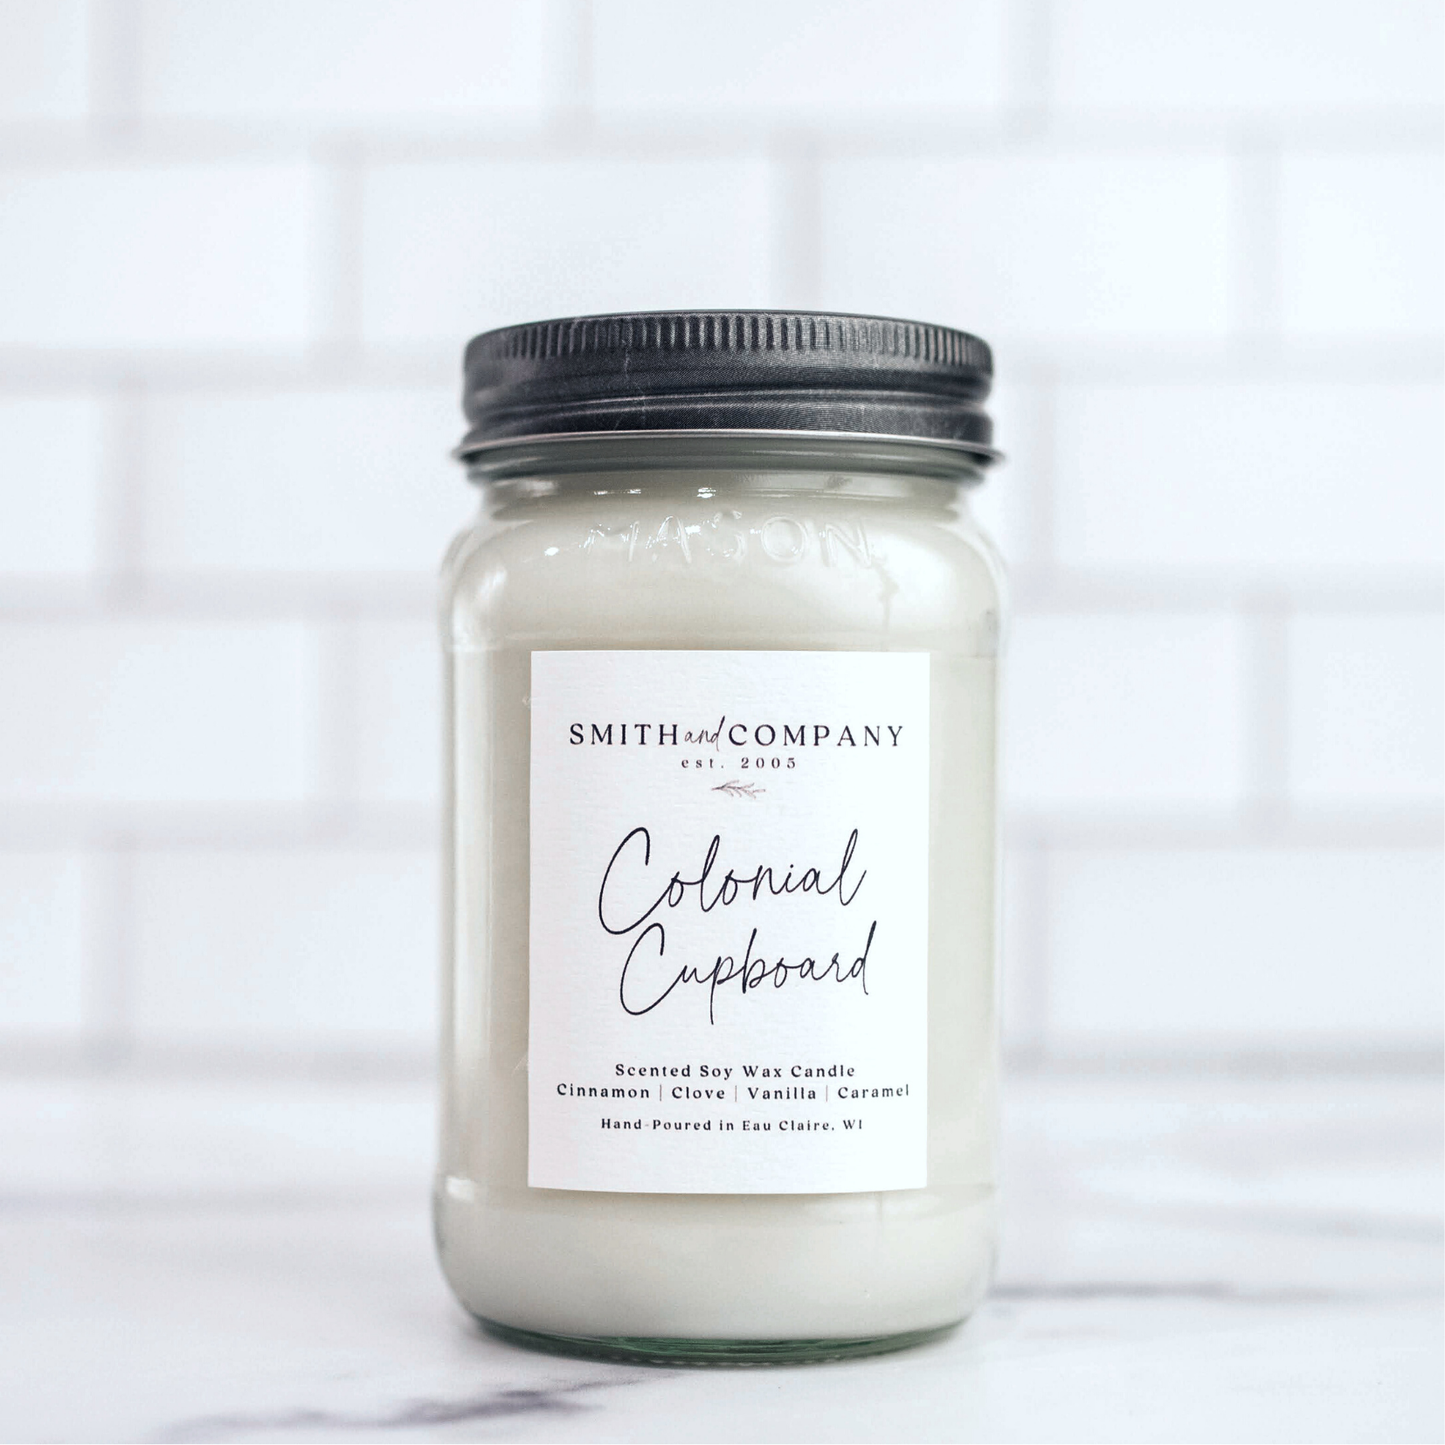 Smith and Company Candles - Colonial Cupboard | Mason Jar Candle